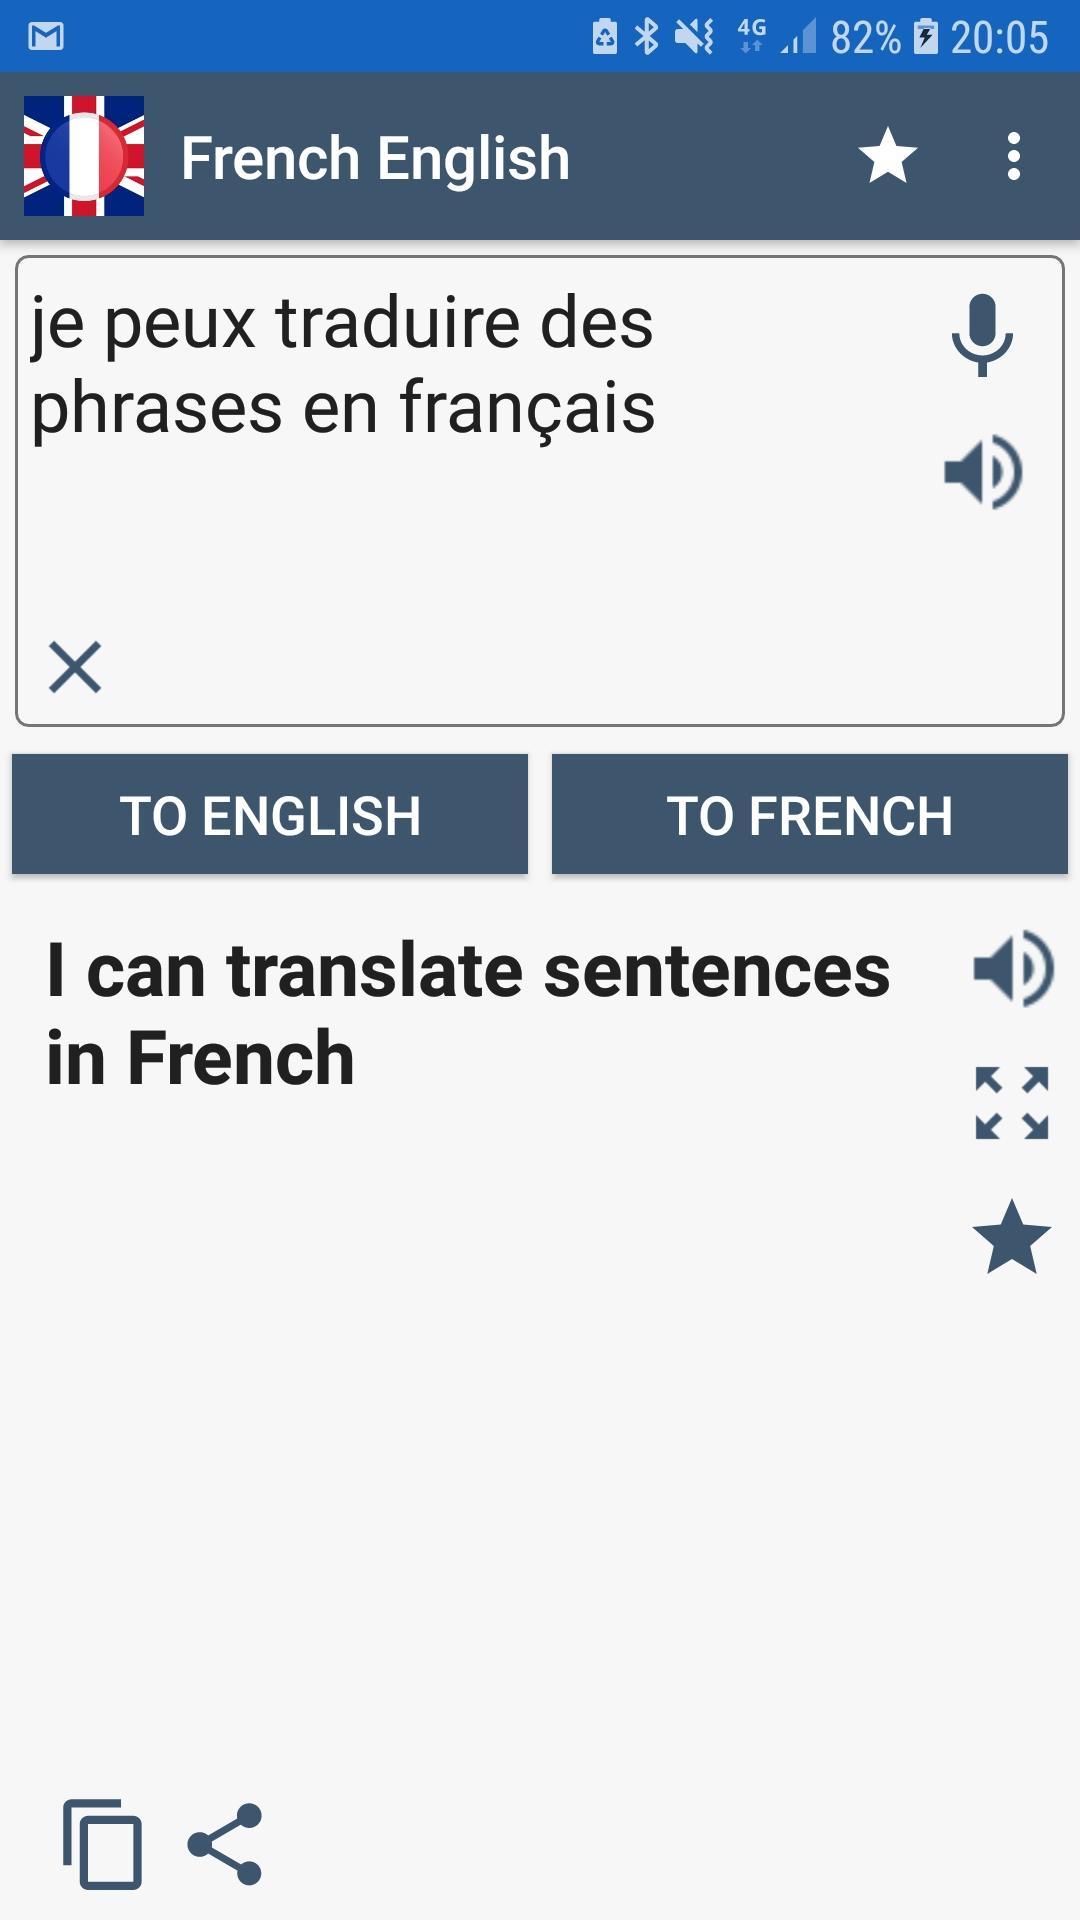 wandering traduction francaise